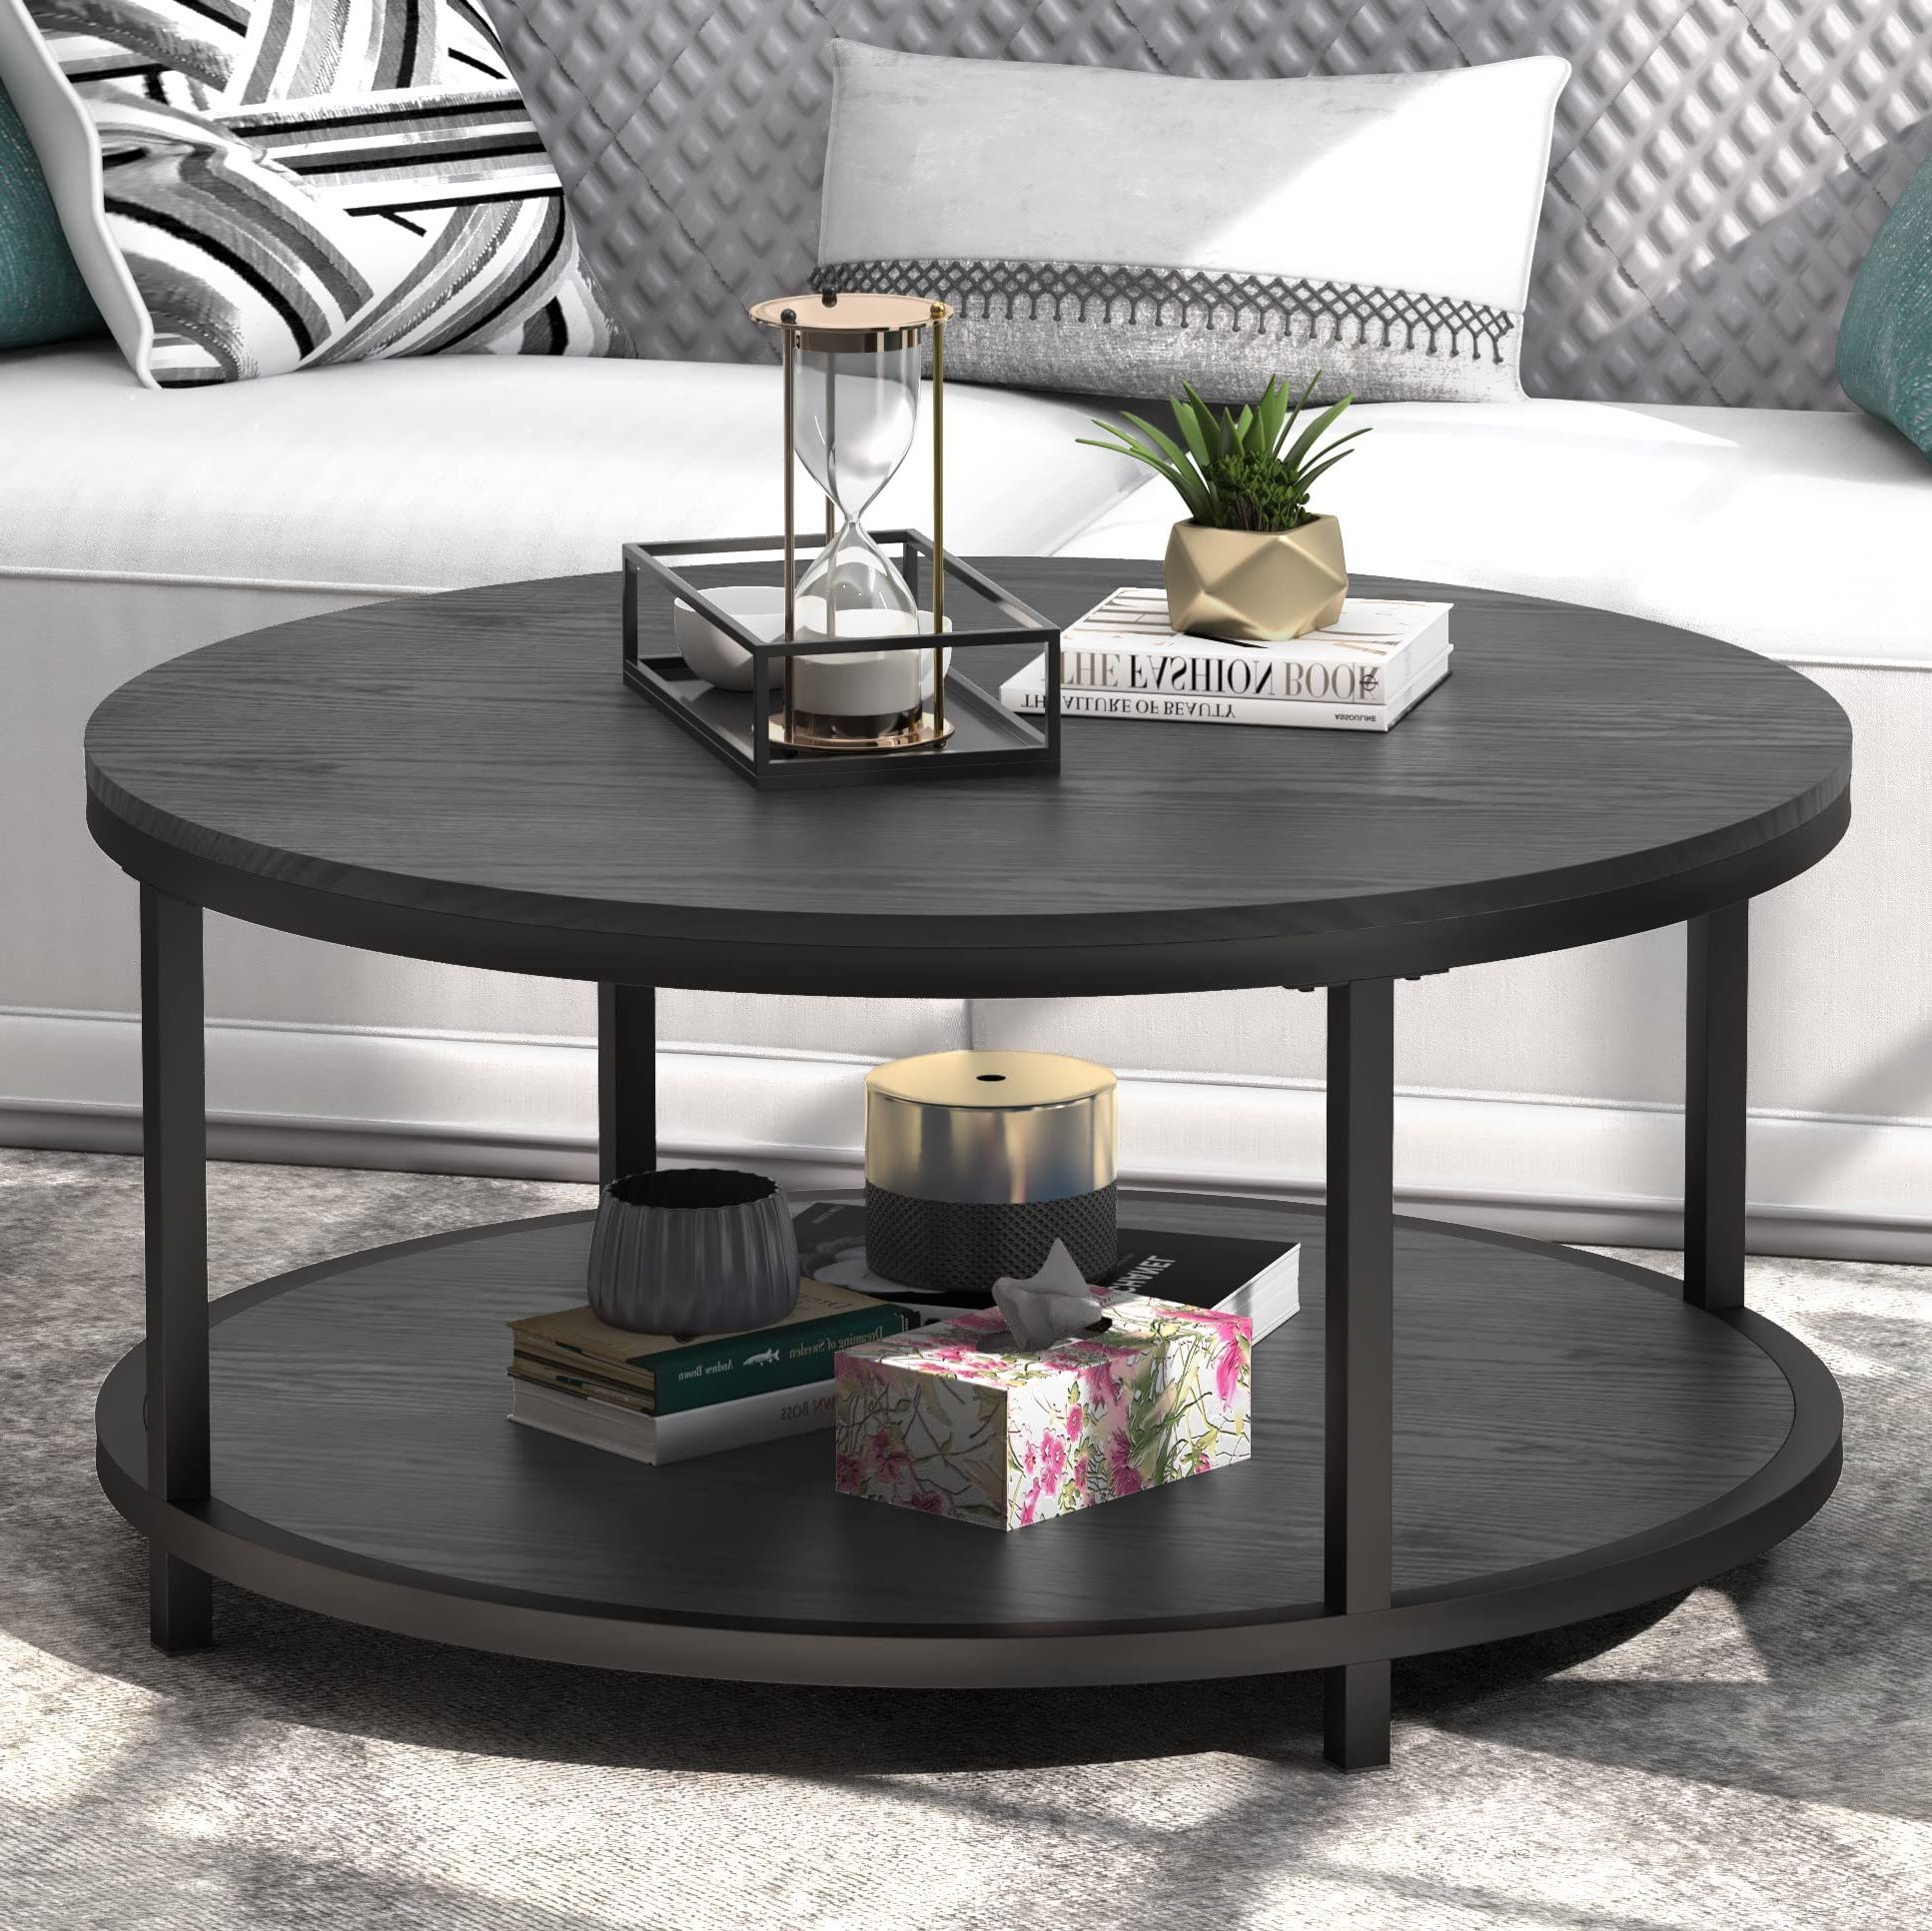 Trendy Full Black Round Coffee Tables With Regard To Edmaxwell Round Coffee Table Black Coffee Tables For Living Room 35.8"  Rustic Industrial Design Circle Table Furniture Sturdy Metal Frame Legs Cocktail  Table With Storage Open Shelf, Easy Assembly : Amazon (View 10 of 10)